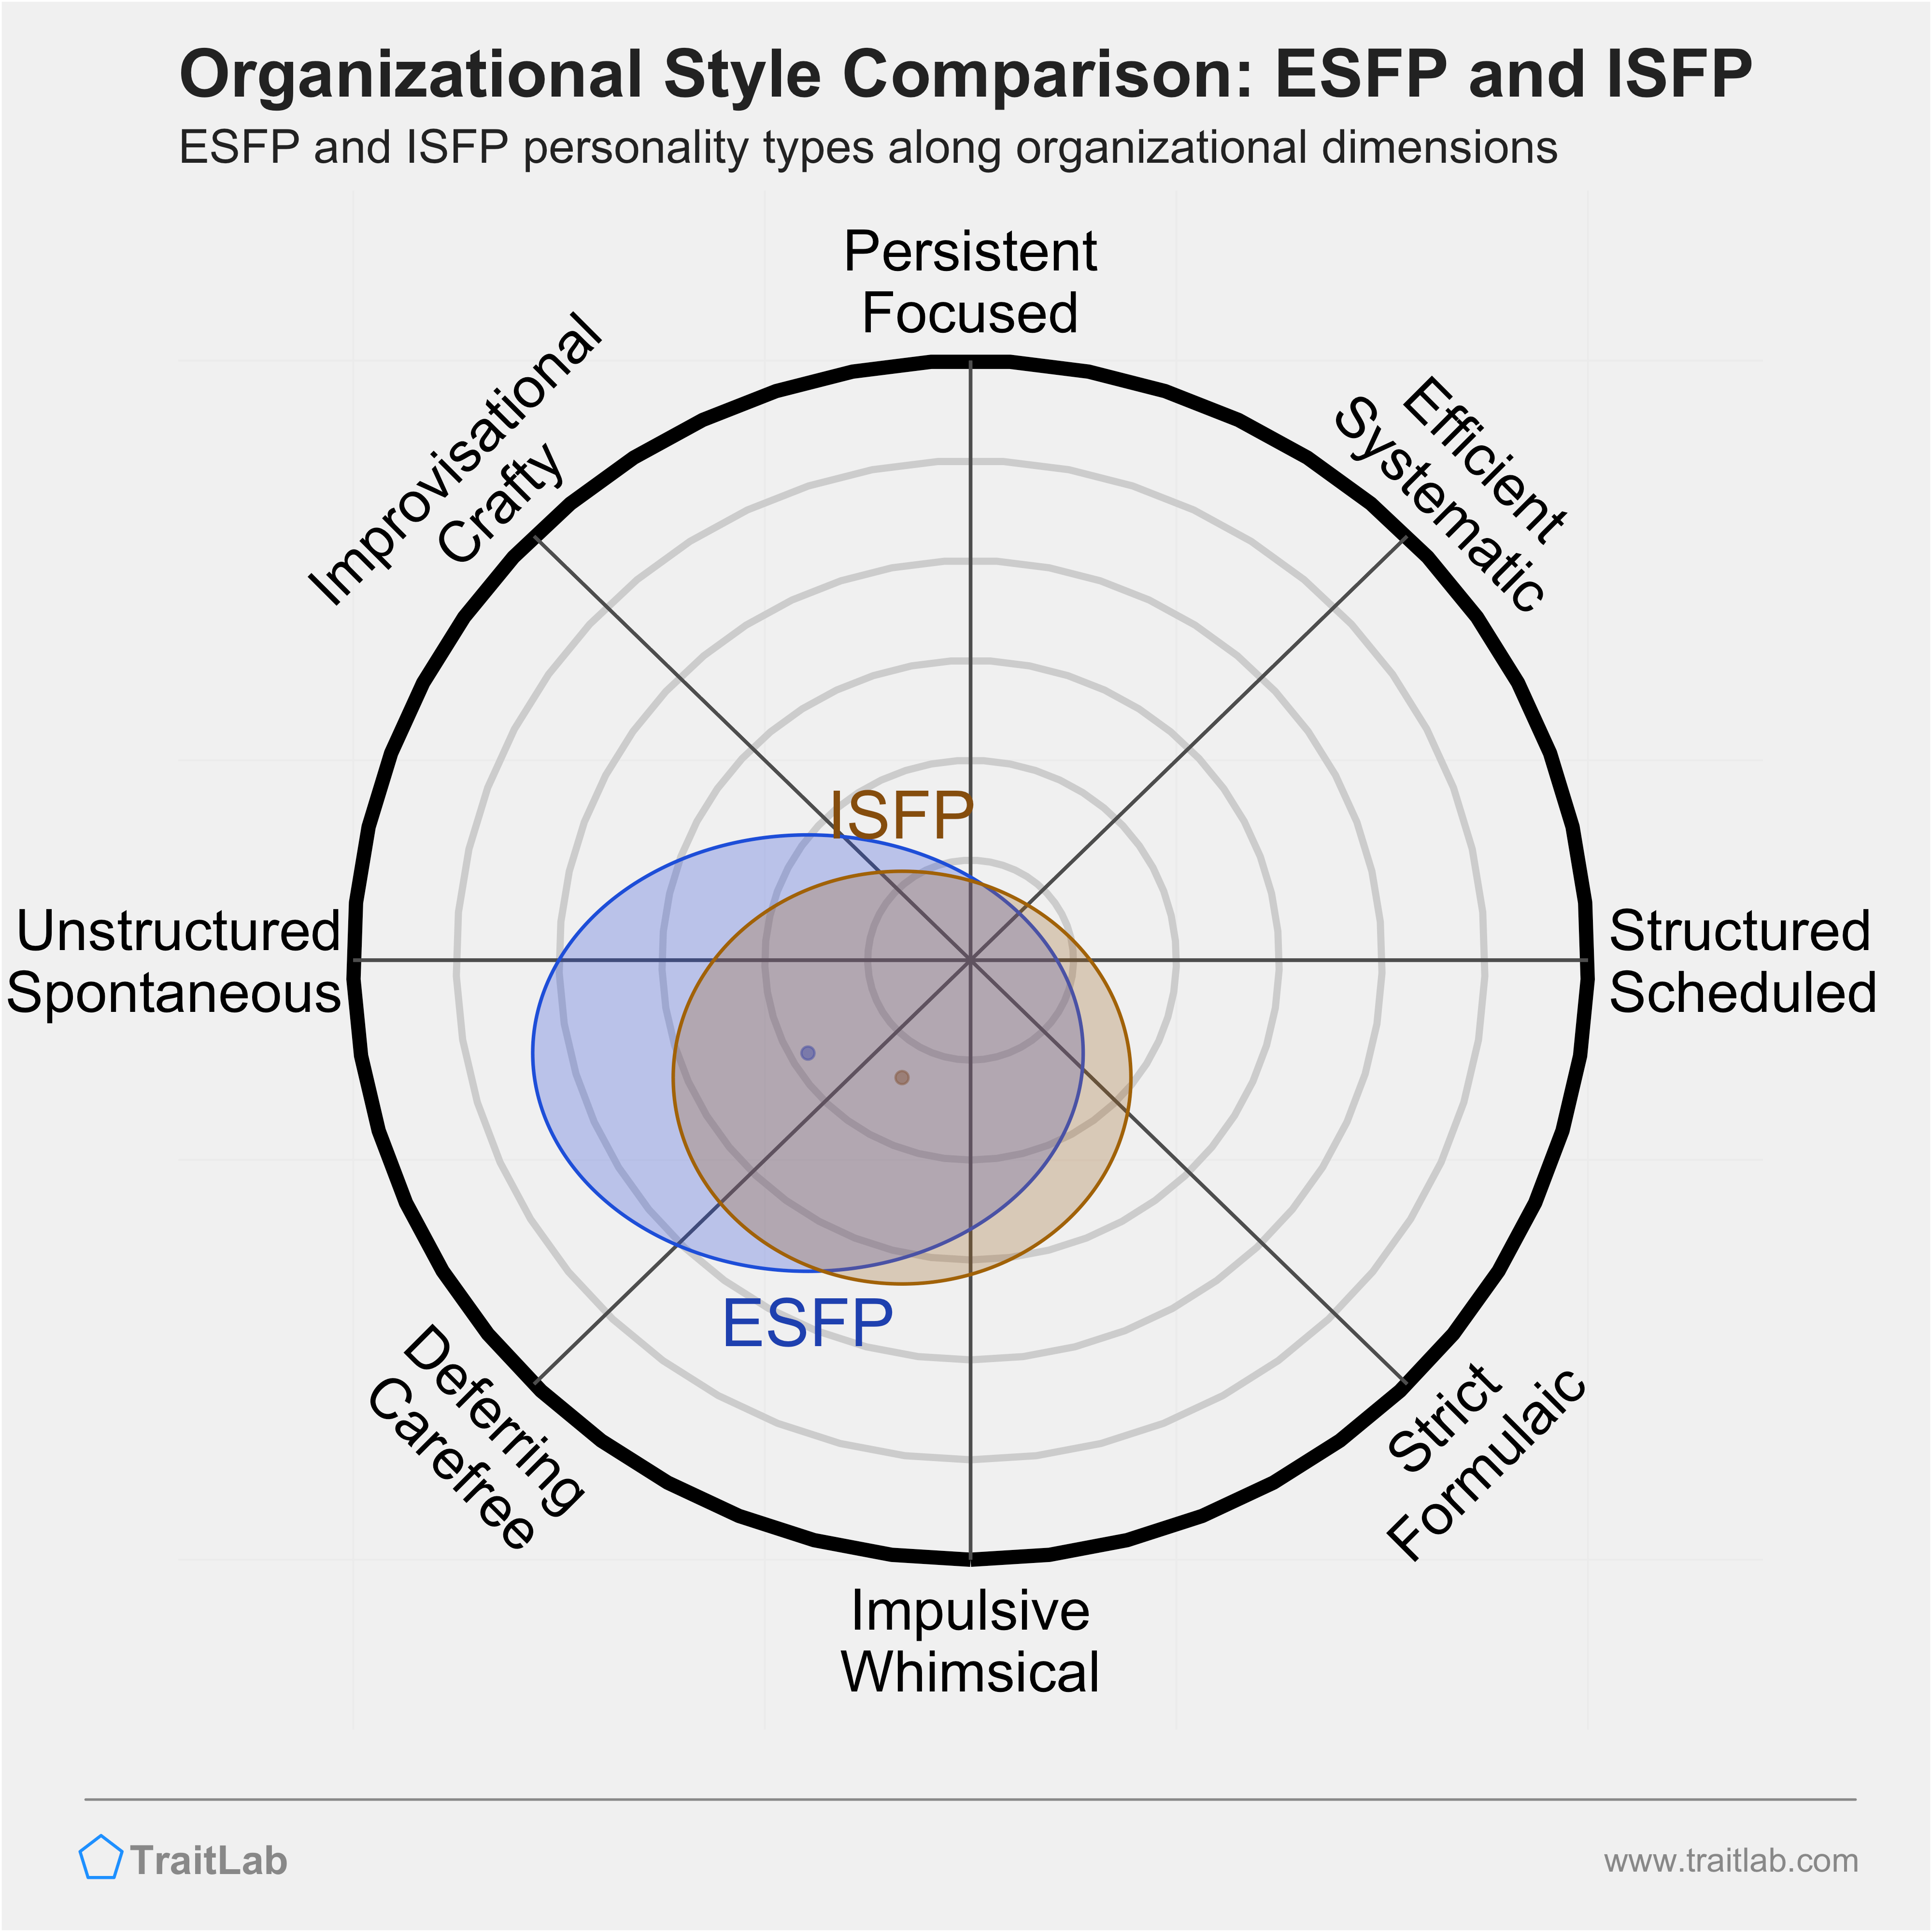 ESFP and ISFP comparison across organizational dimensions